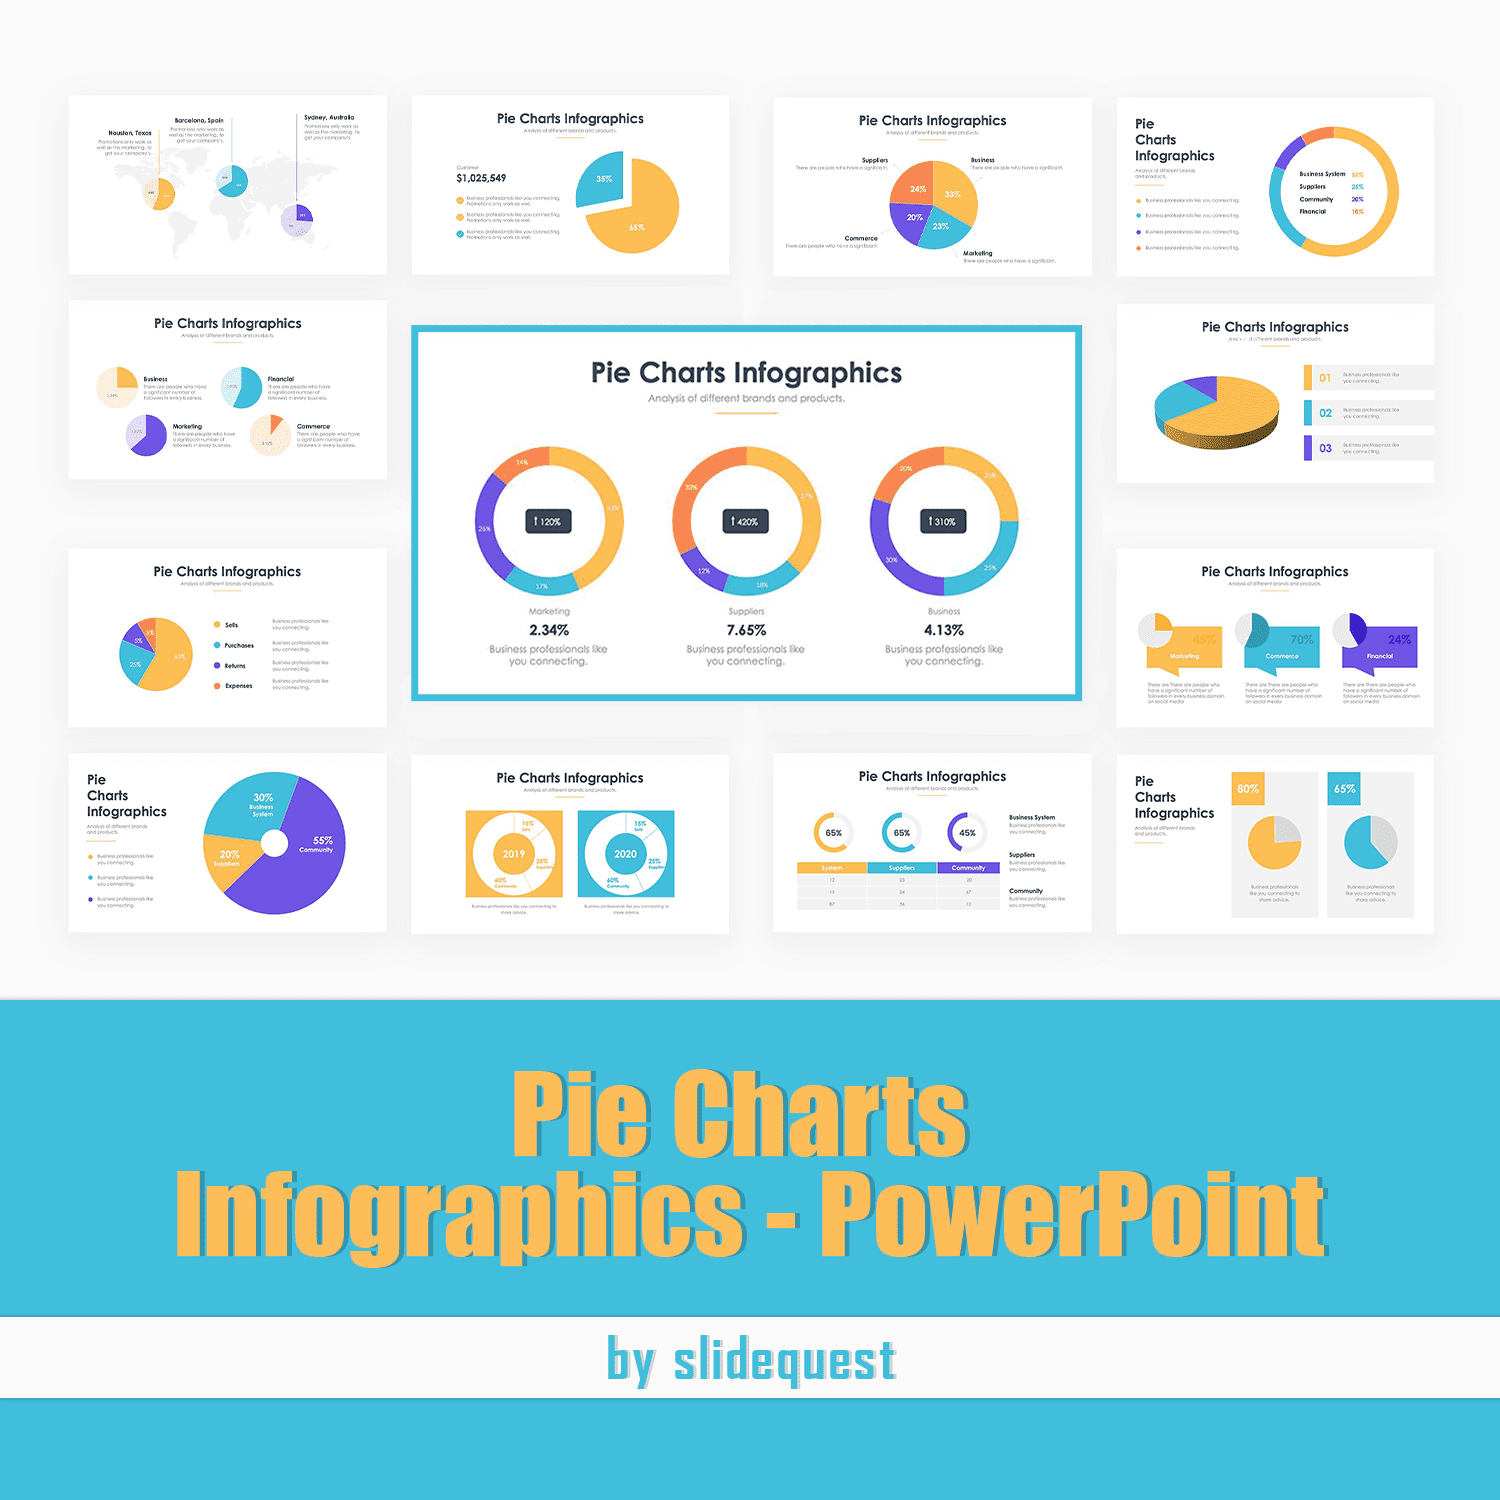 pie charts infographics powerpoint.